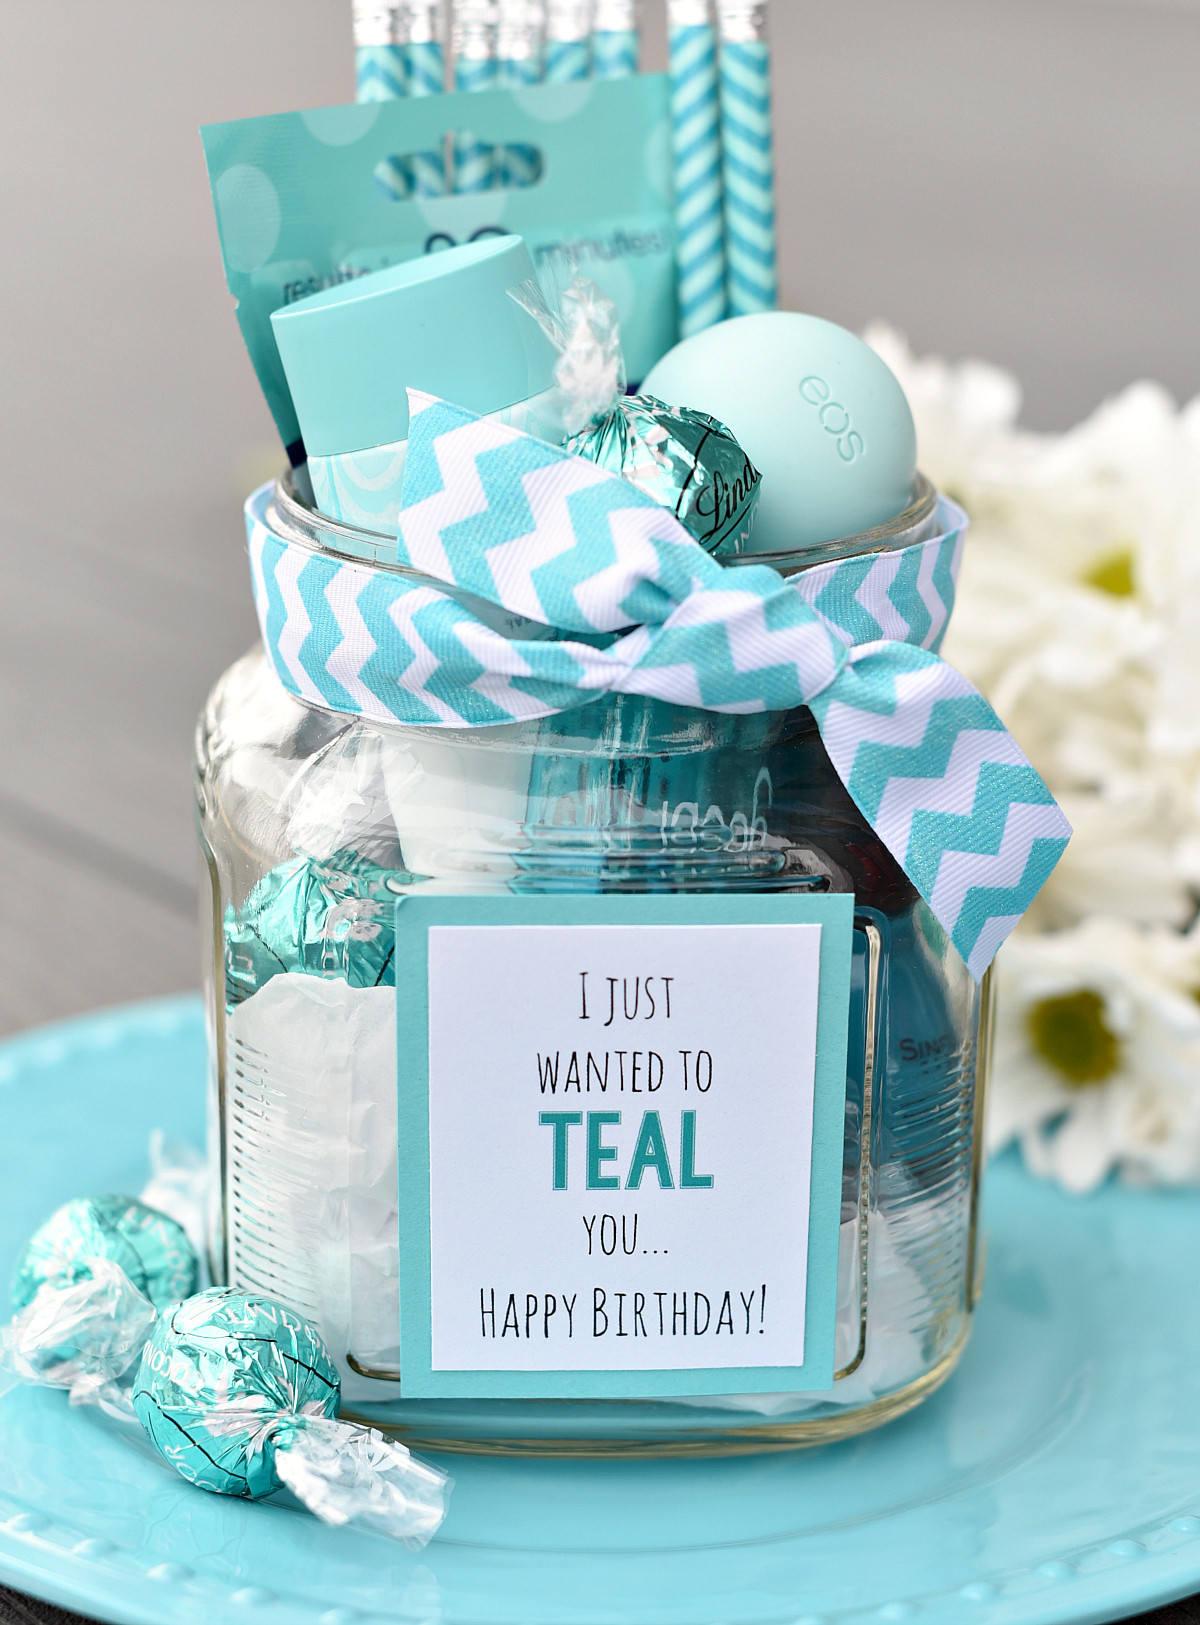 DIY Gifts For Friends Birthday
 Teal Birthday Gift Idea for Friends – Fun Squared